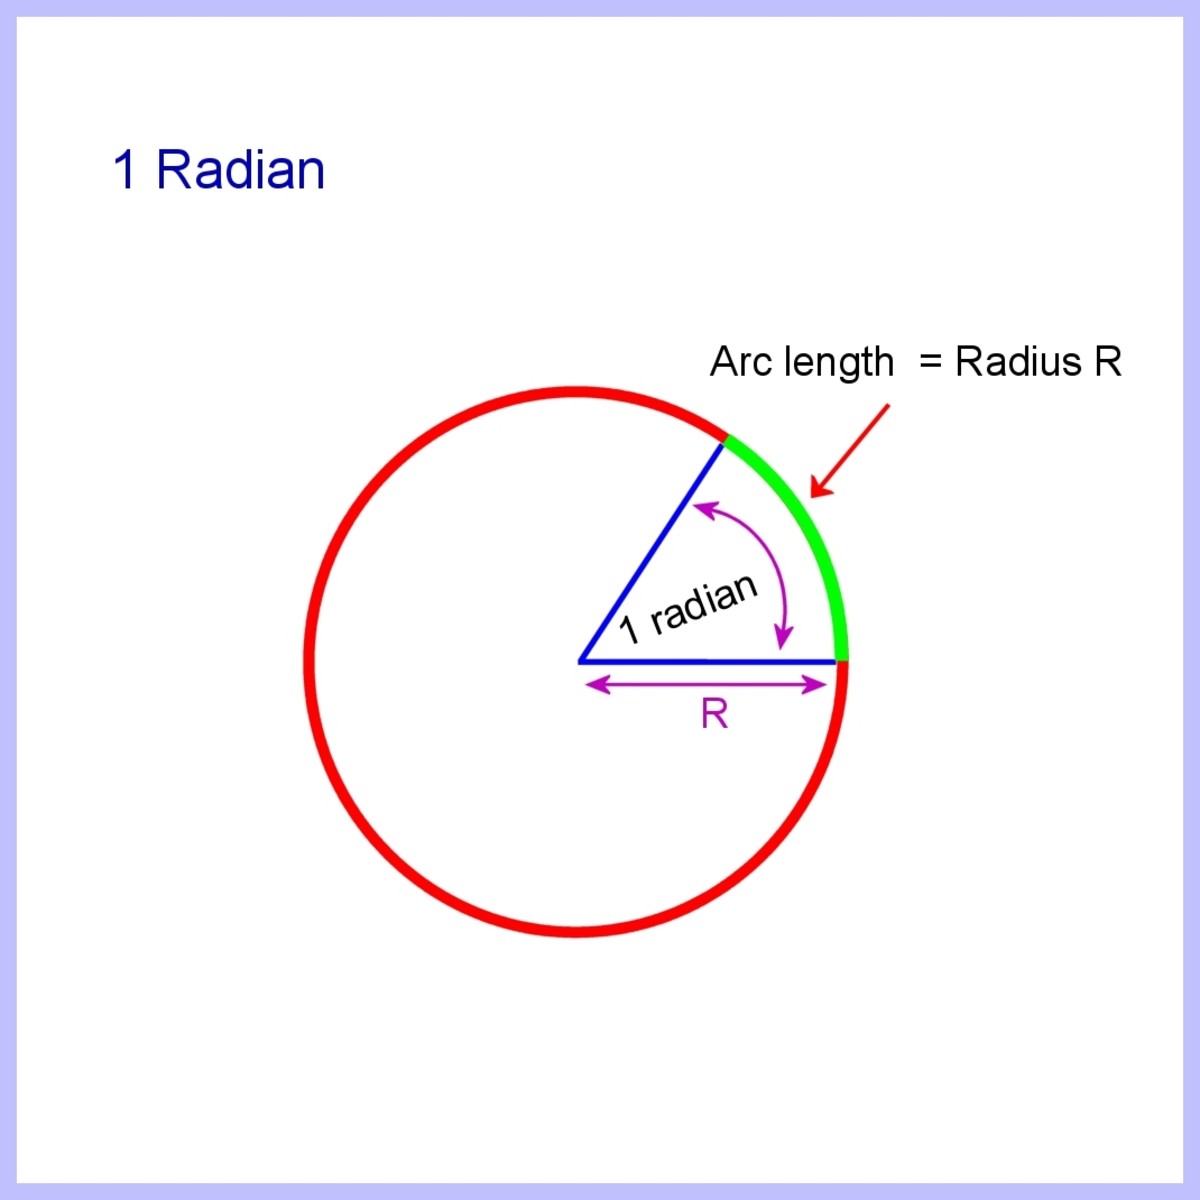 how-to-calculate-arc-length-of-a-circle-segment-and-sector-area-owlcation